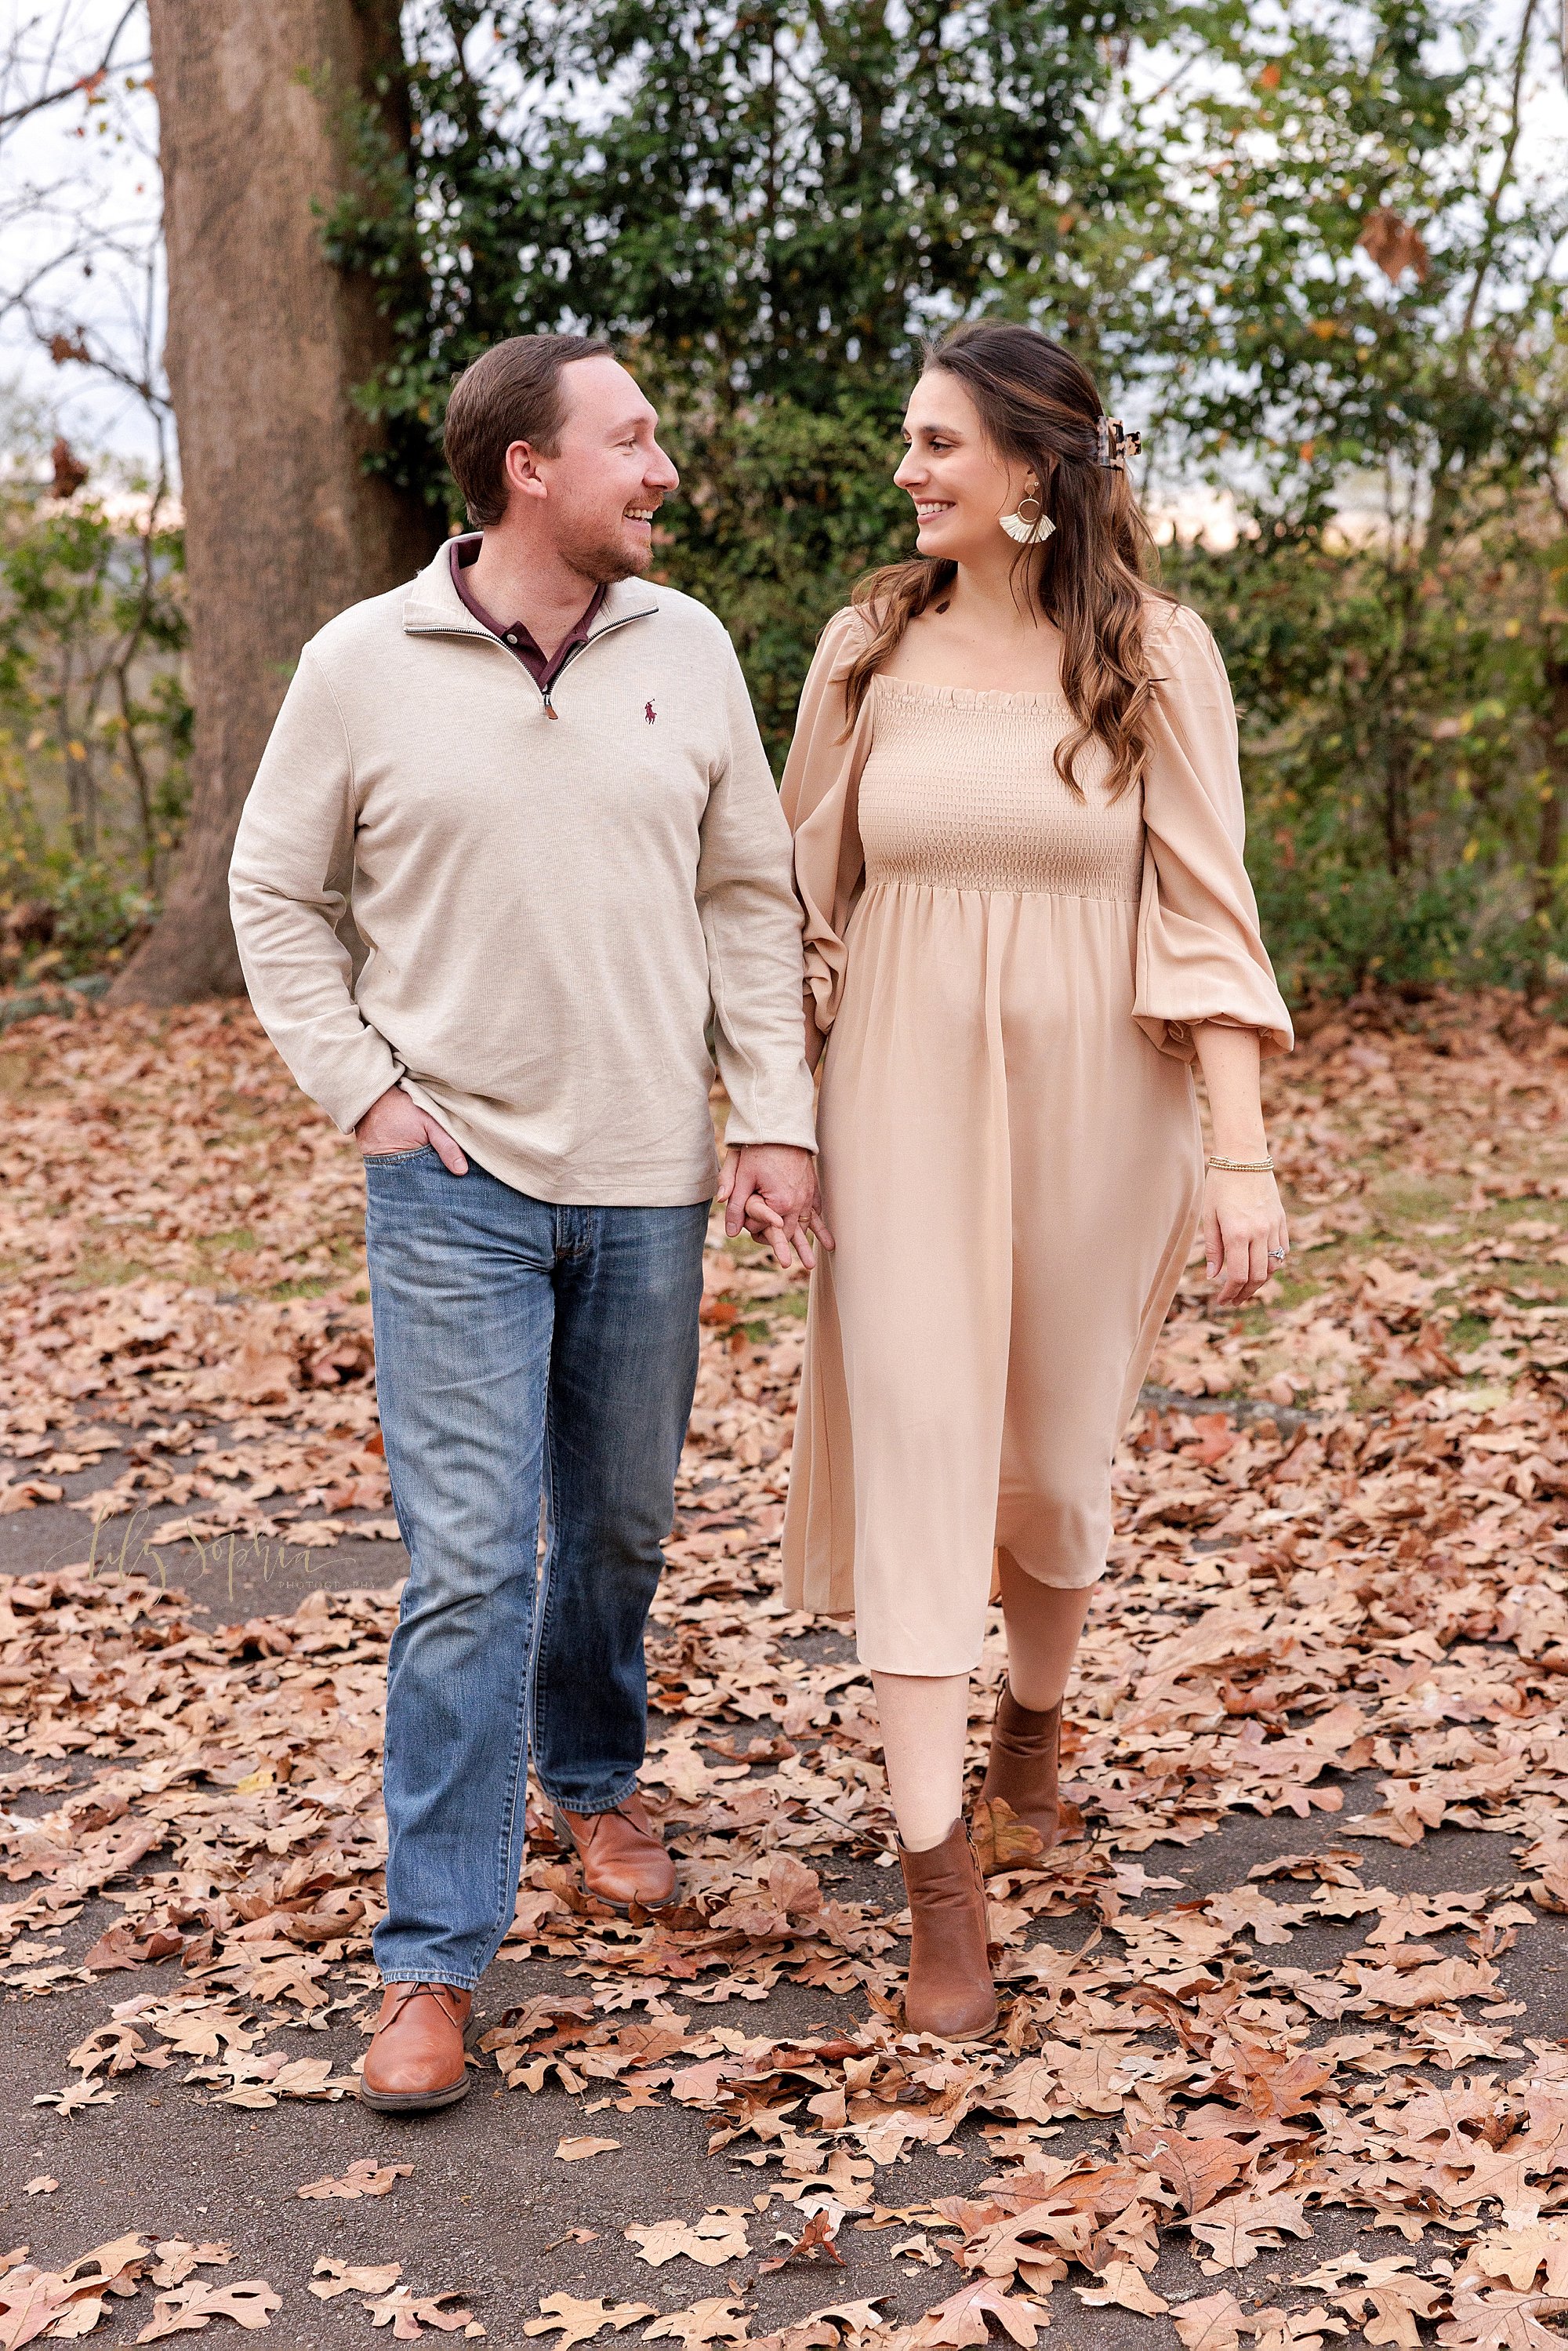  Maternity photo shoot in an Atlanta park at sunset while the couple talk to one another while walking hand in hand along a leaf covered path during autumn. 